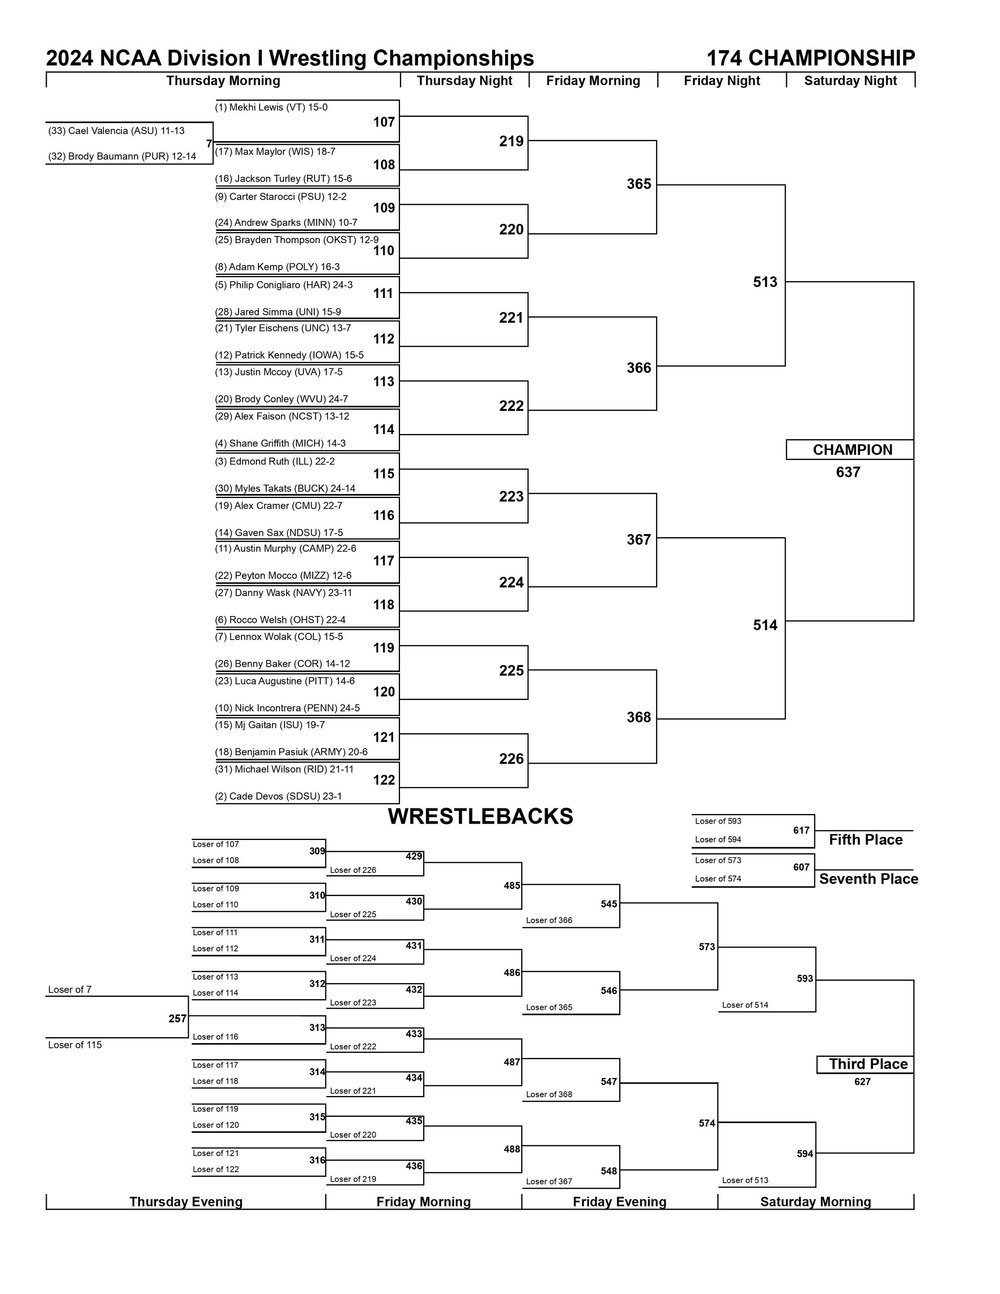 March 2024 NCAA Division I Championship Wrestling Brackets -- 174 pound weight class.jpg